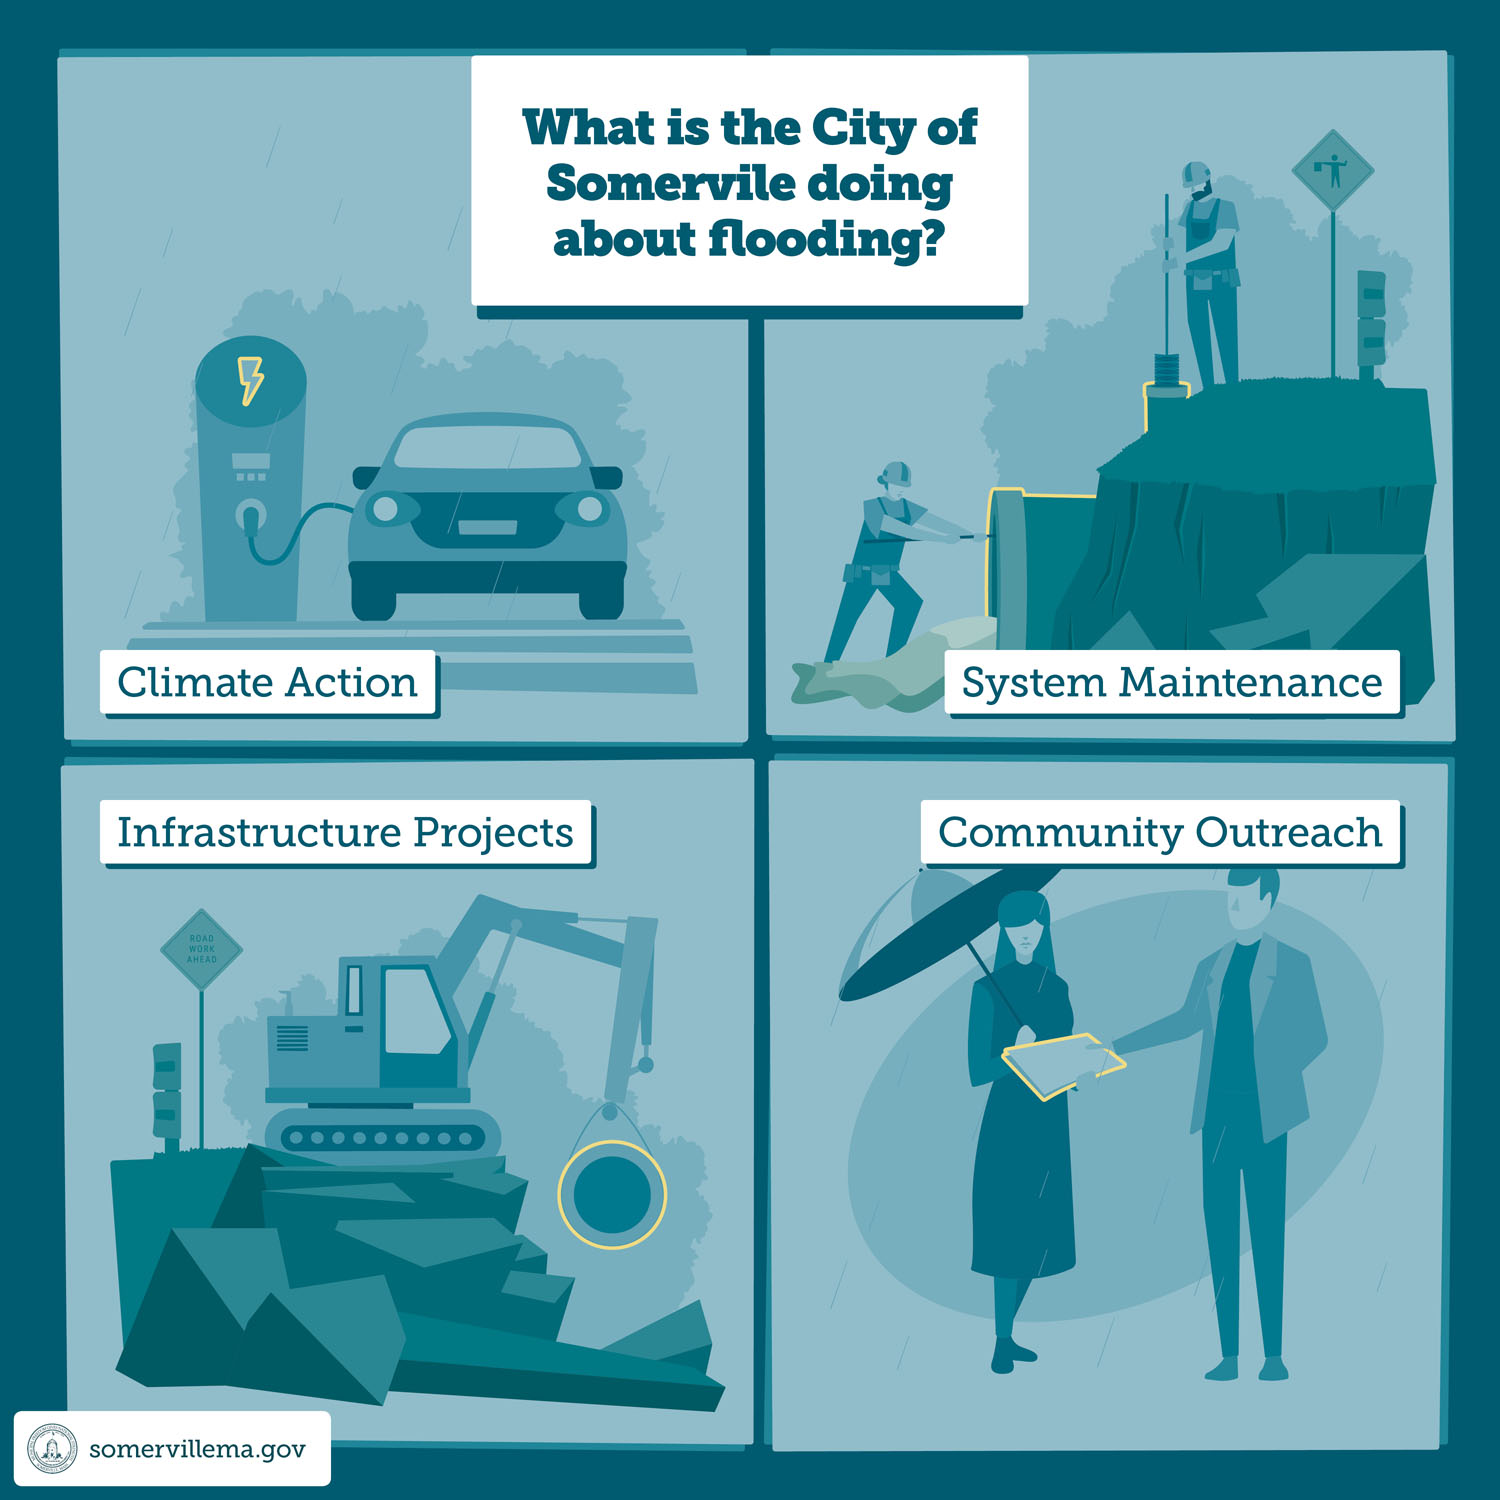 What is the City of Somerville Doing About Flooding?